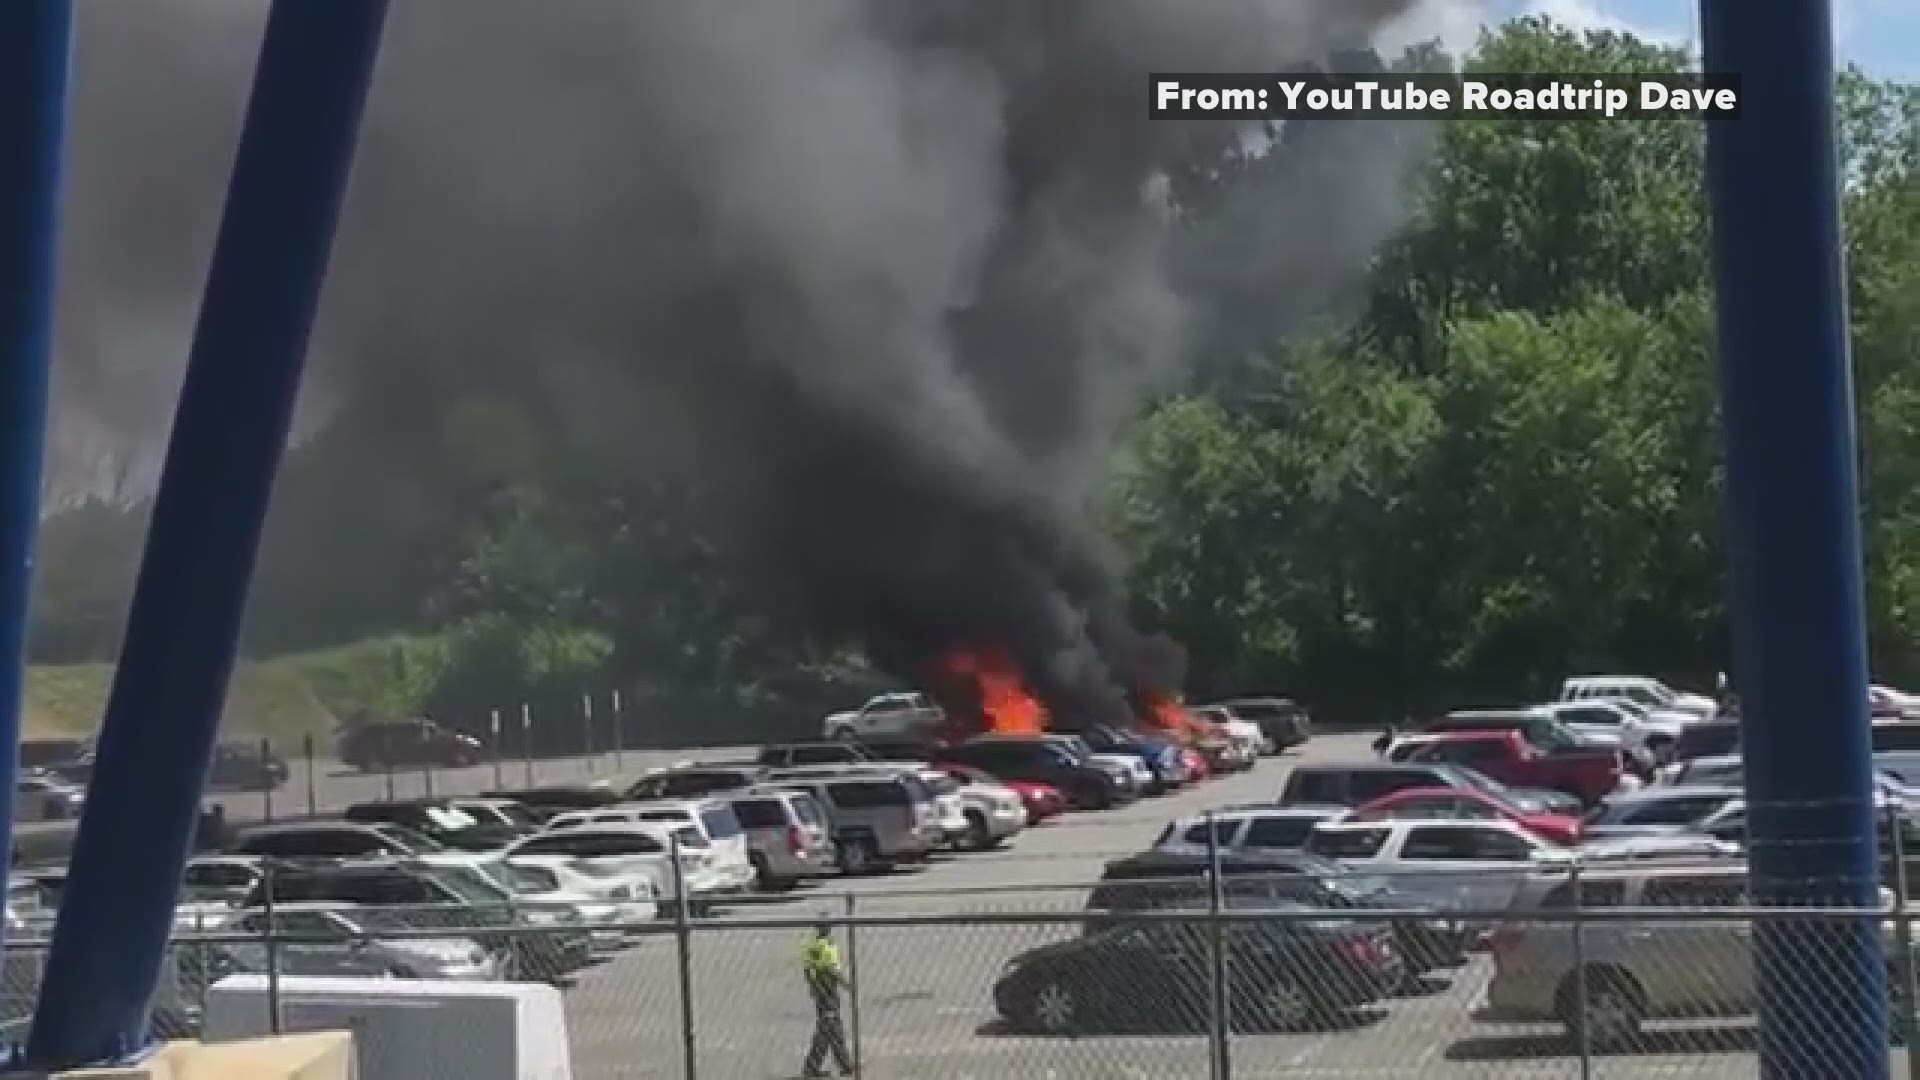 Here is another view of the fire in the Carowinds parking lot. Officials say about 10 cars were affected in Friday's fire.Video by Roadtrip Dave.